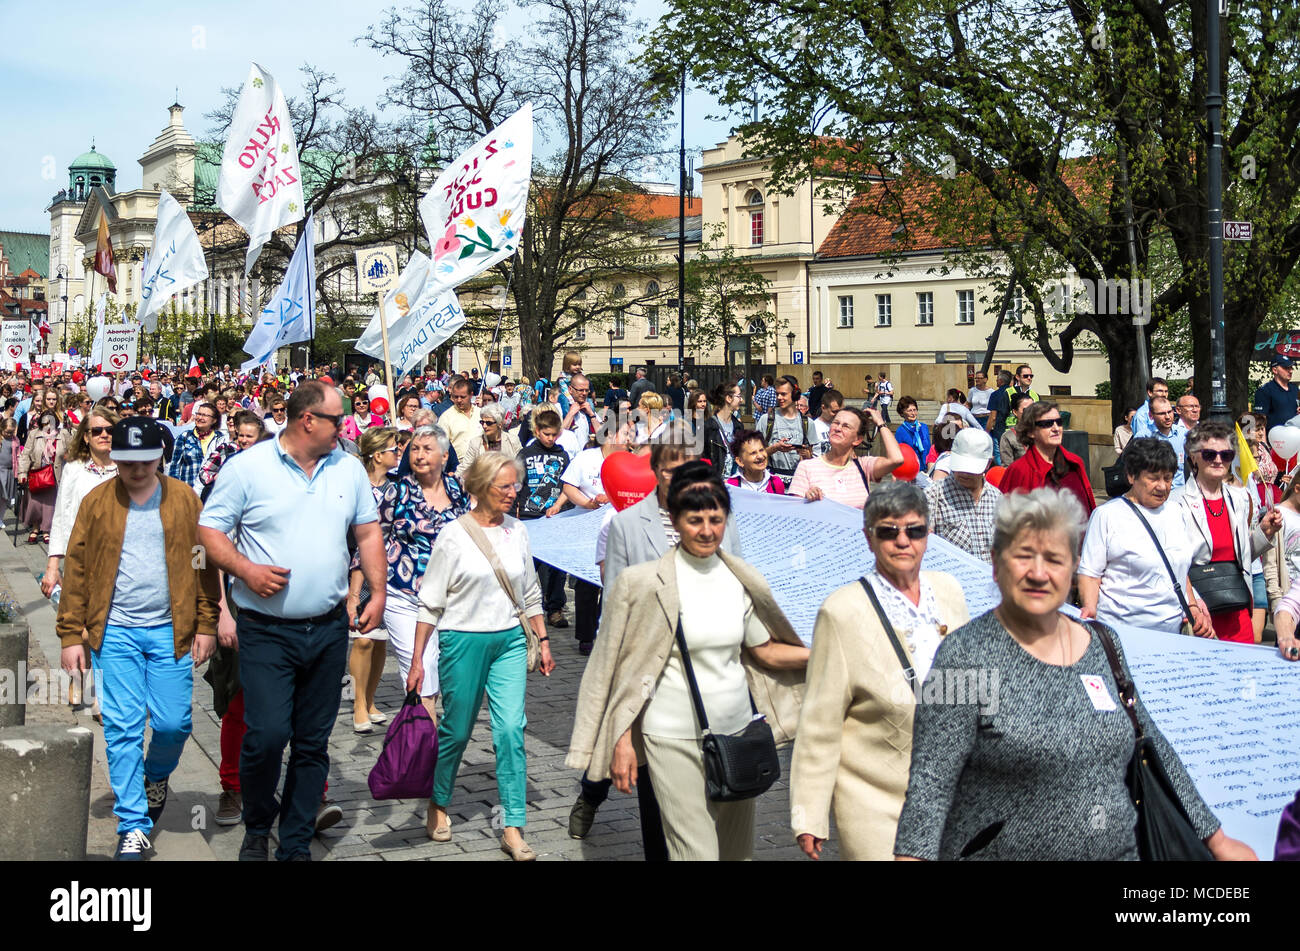 Poland, Warsaw: Pro-life demonstrators during the annual March for Life or Sanctity of Life March in the Poland’s capital. Stock Photo